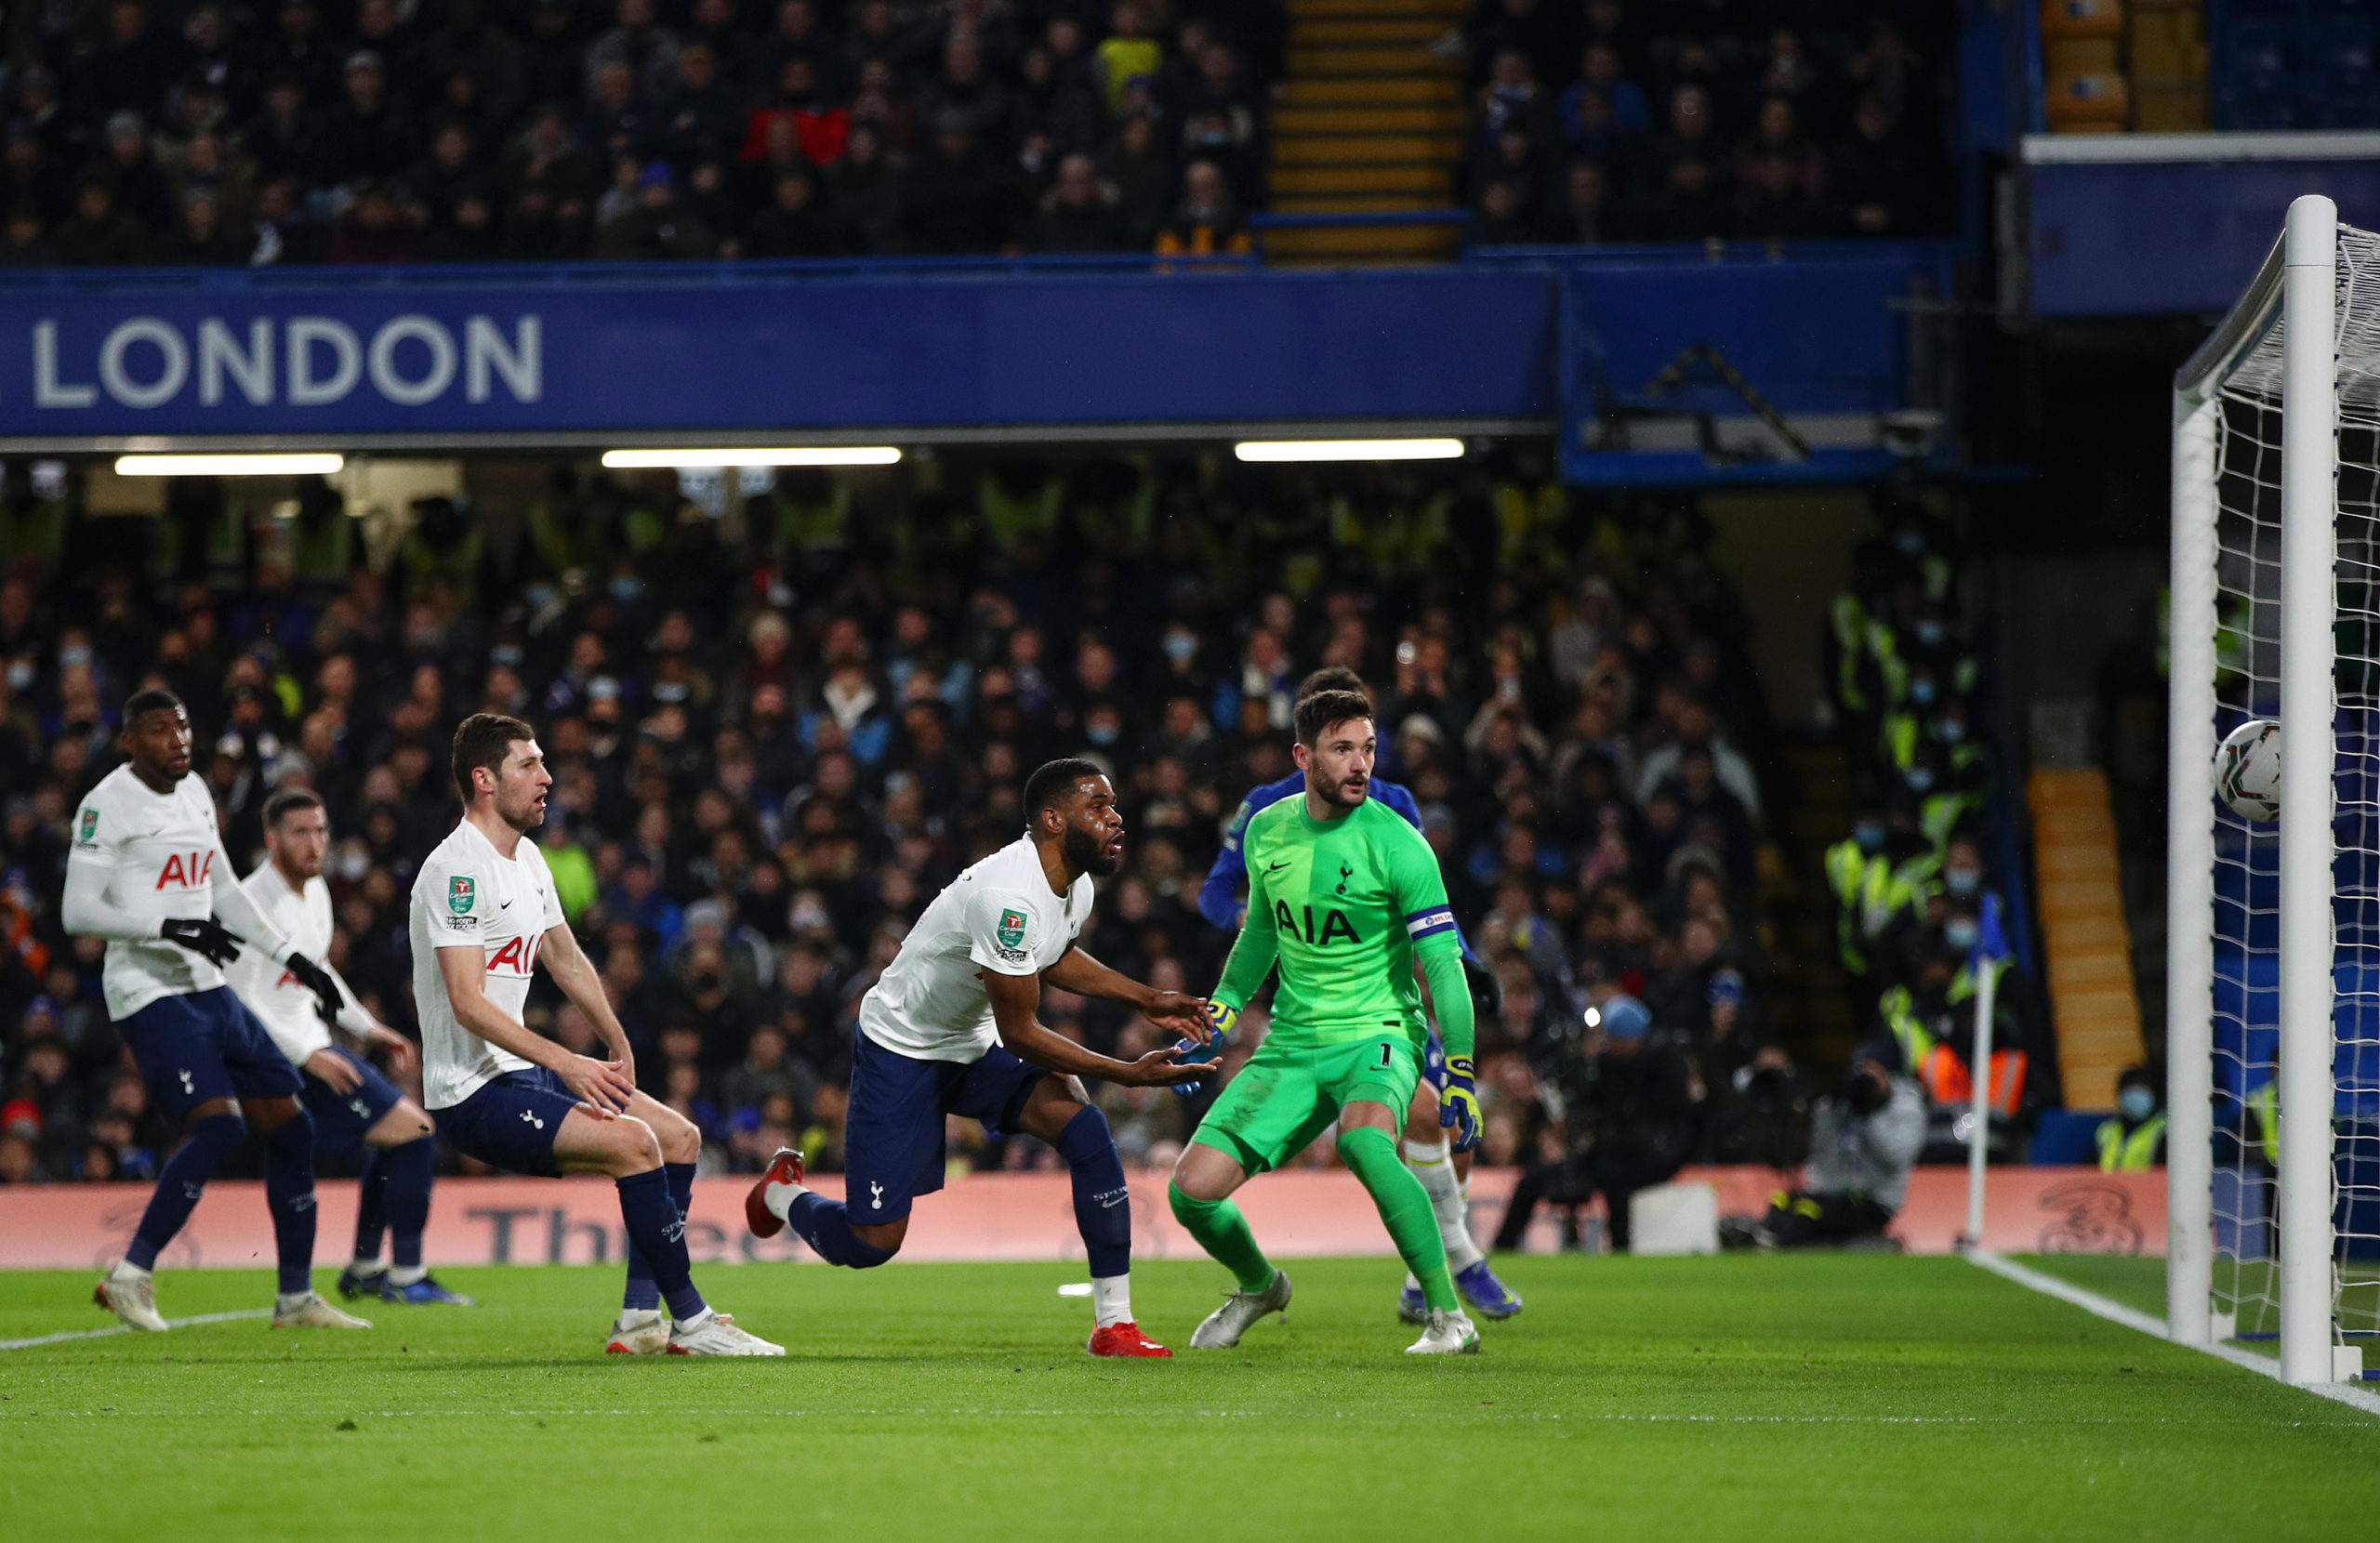 'One of the greatest teams': Tottenham player raves about Chelsea after playing against them last night